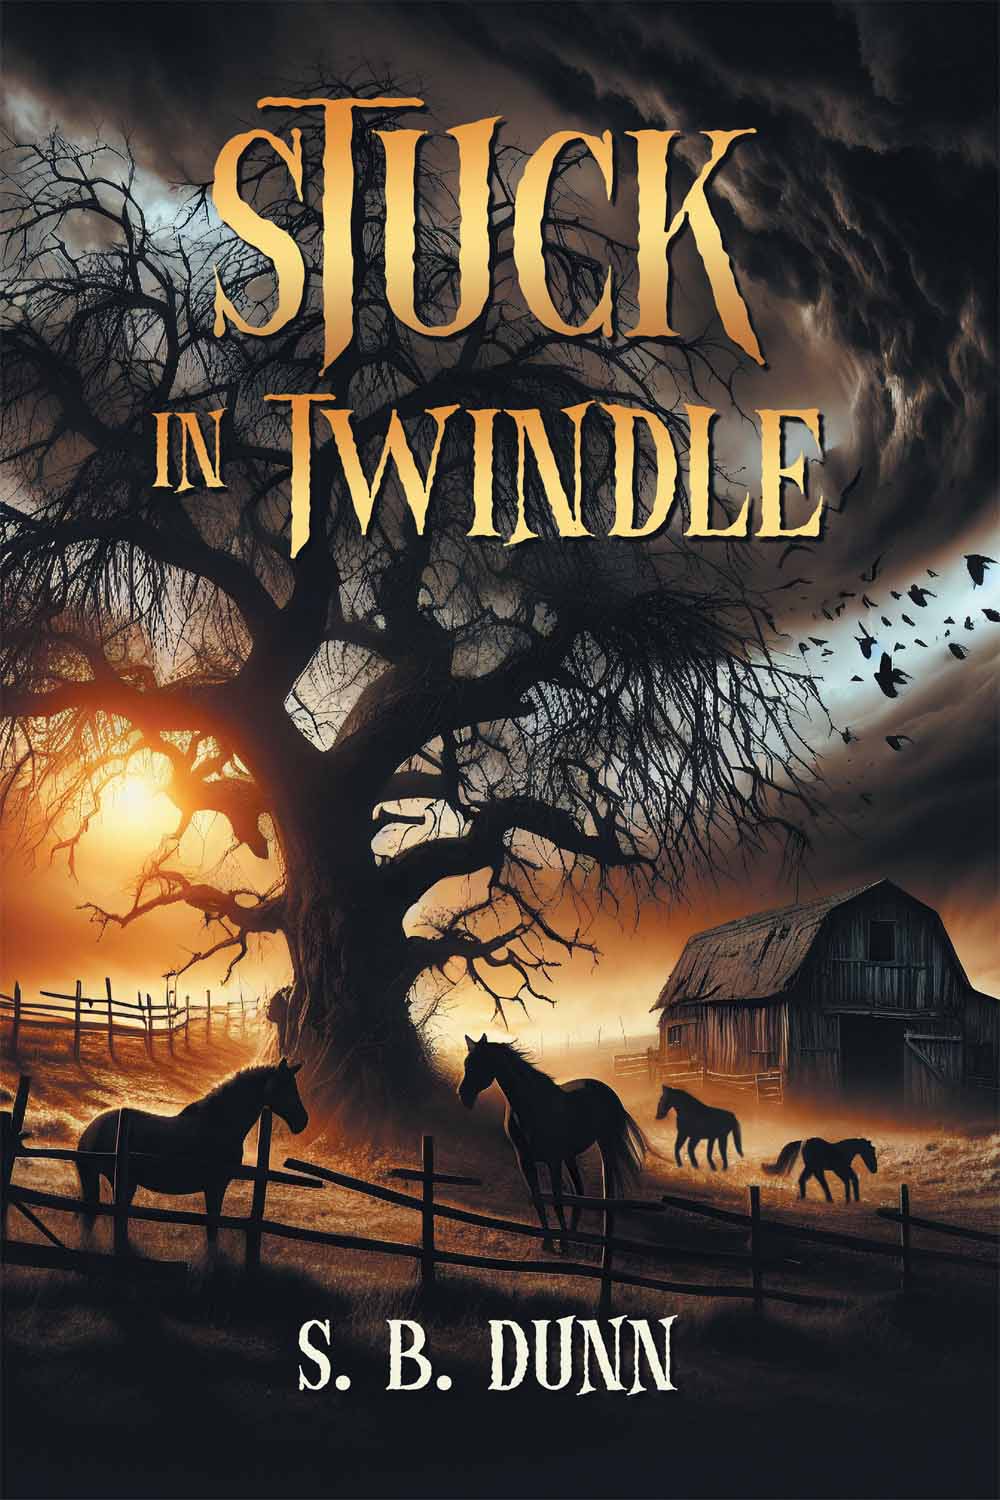 Stuck in Twindle by S. B. Dunn